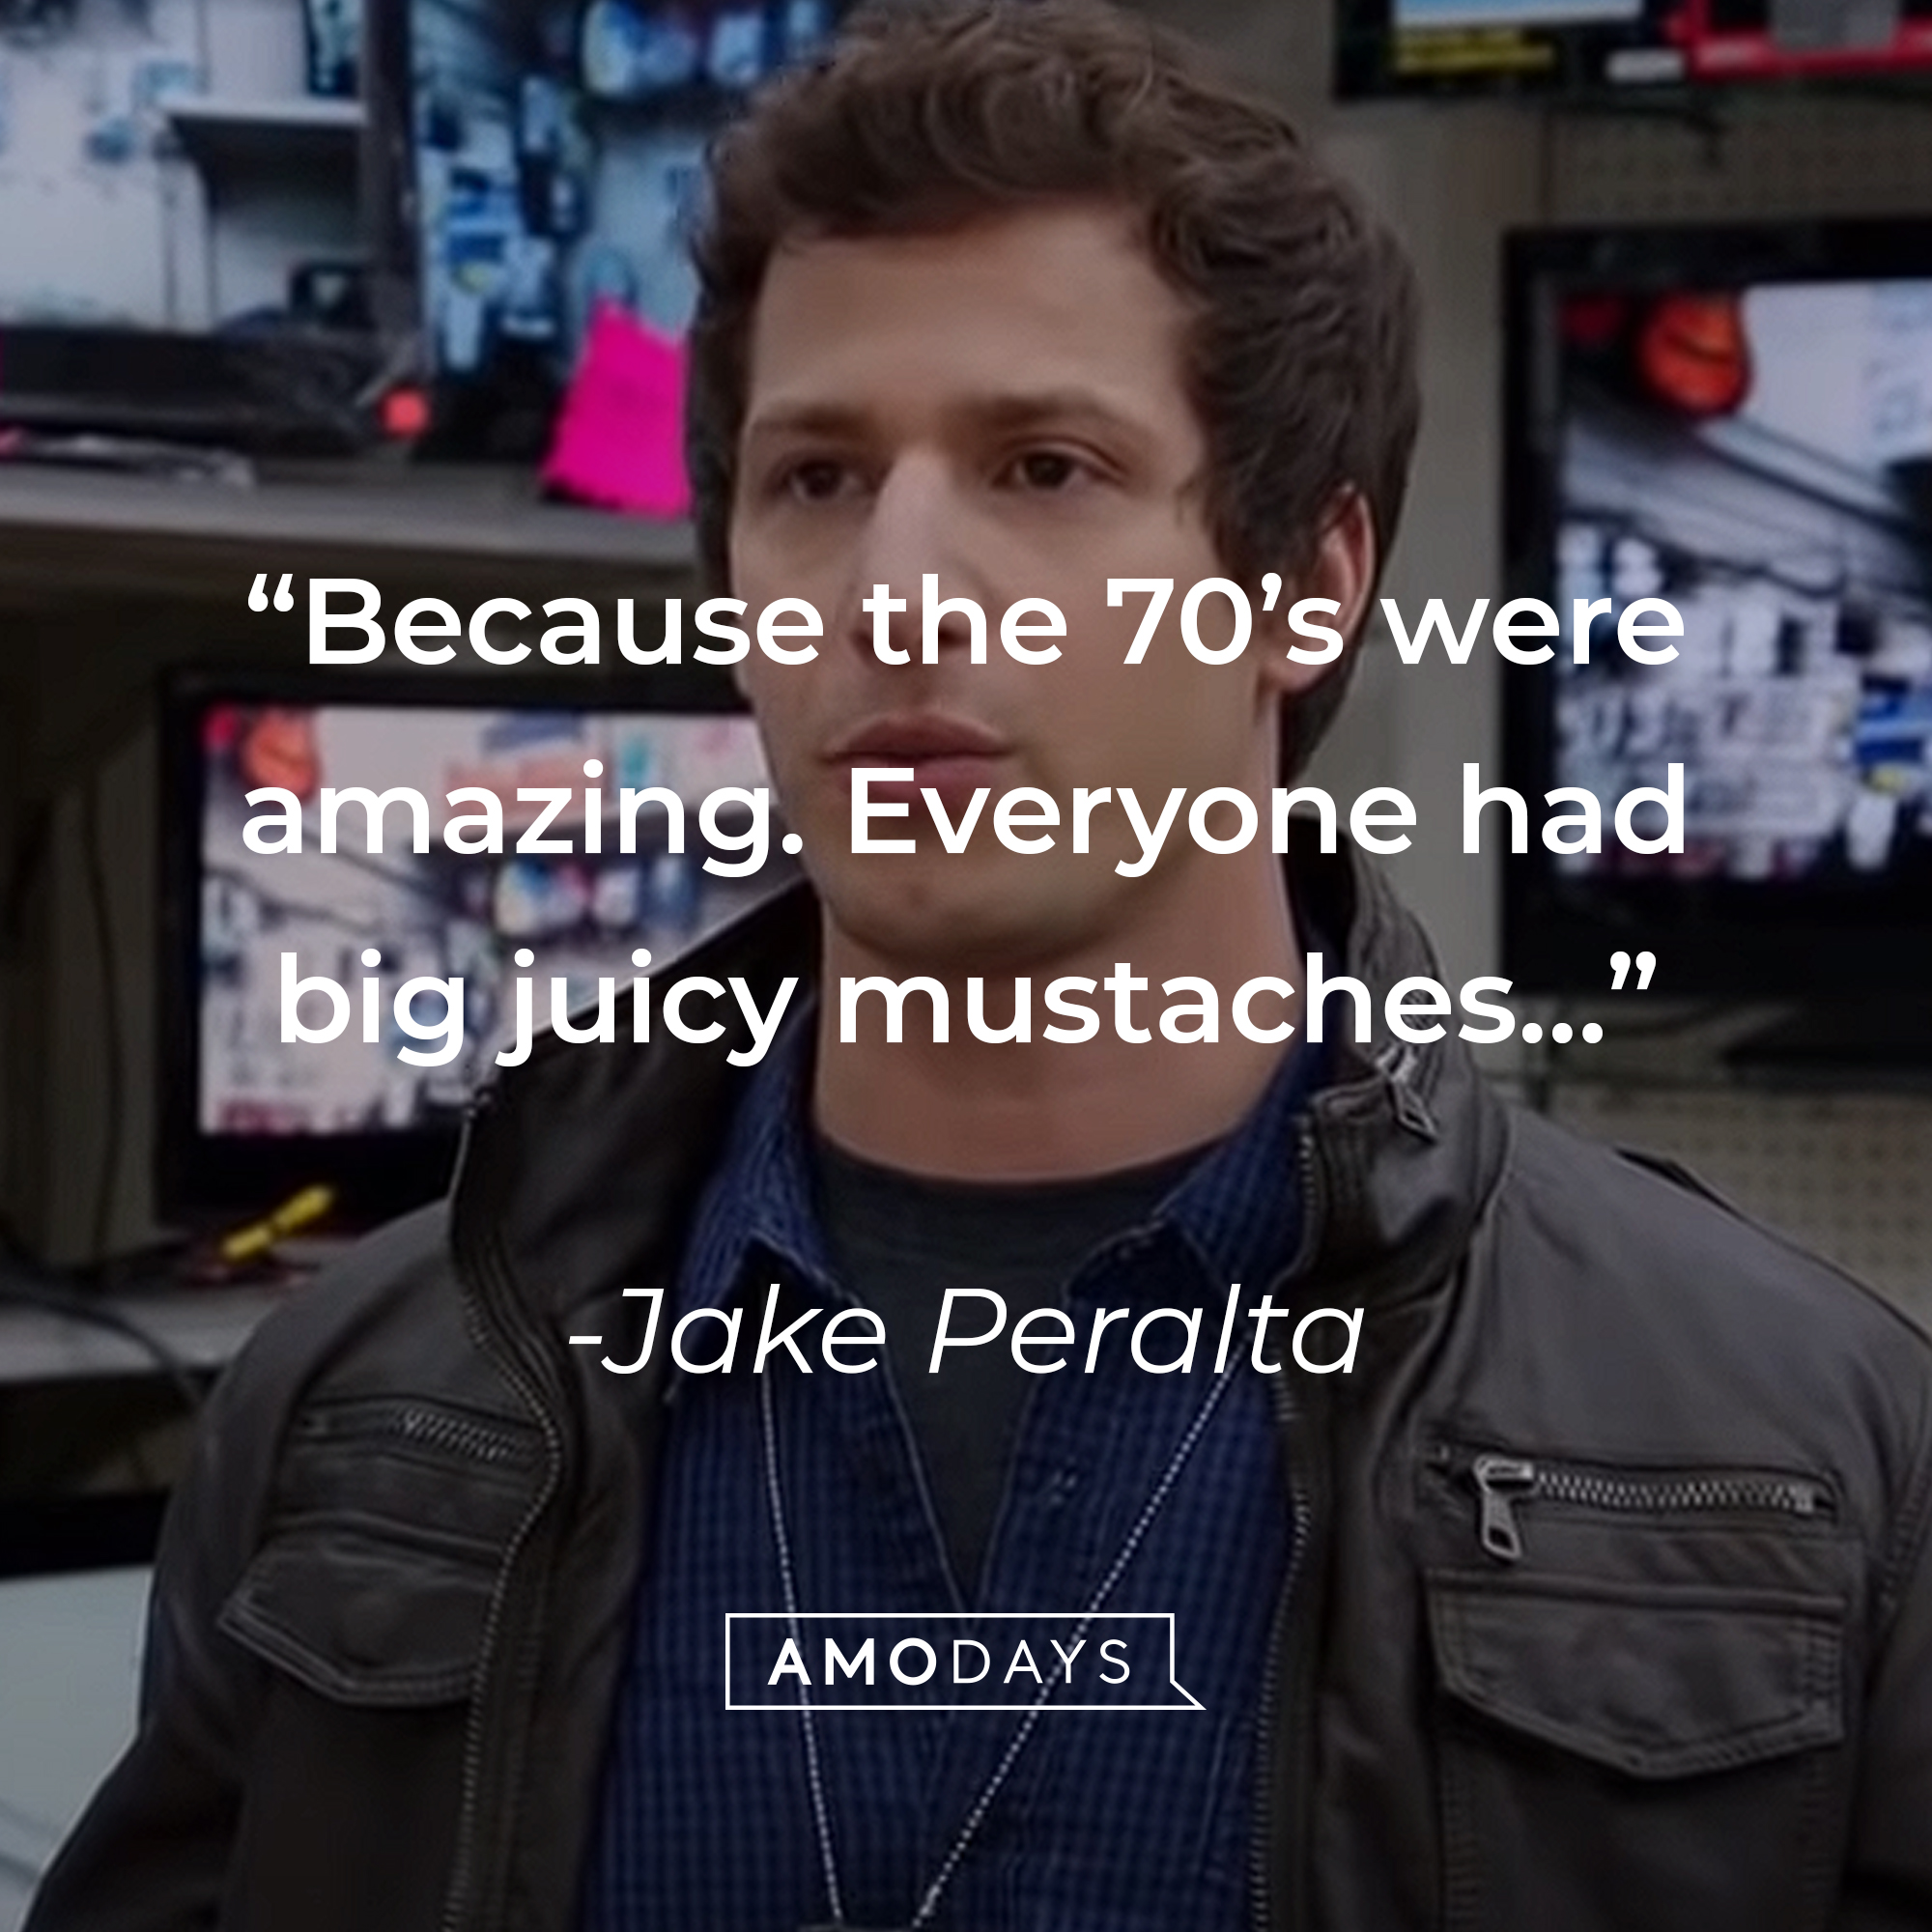 A picture of Jake Peralta with his quote: “Because the 70’s were amazing. Everyone had big juicy mustaches…” |Source: youtube.com/NBCBrooklyn99